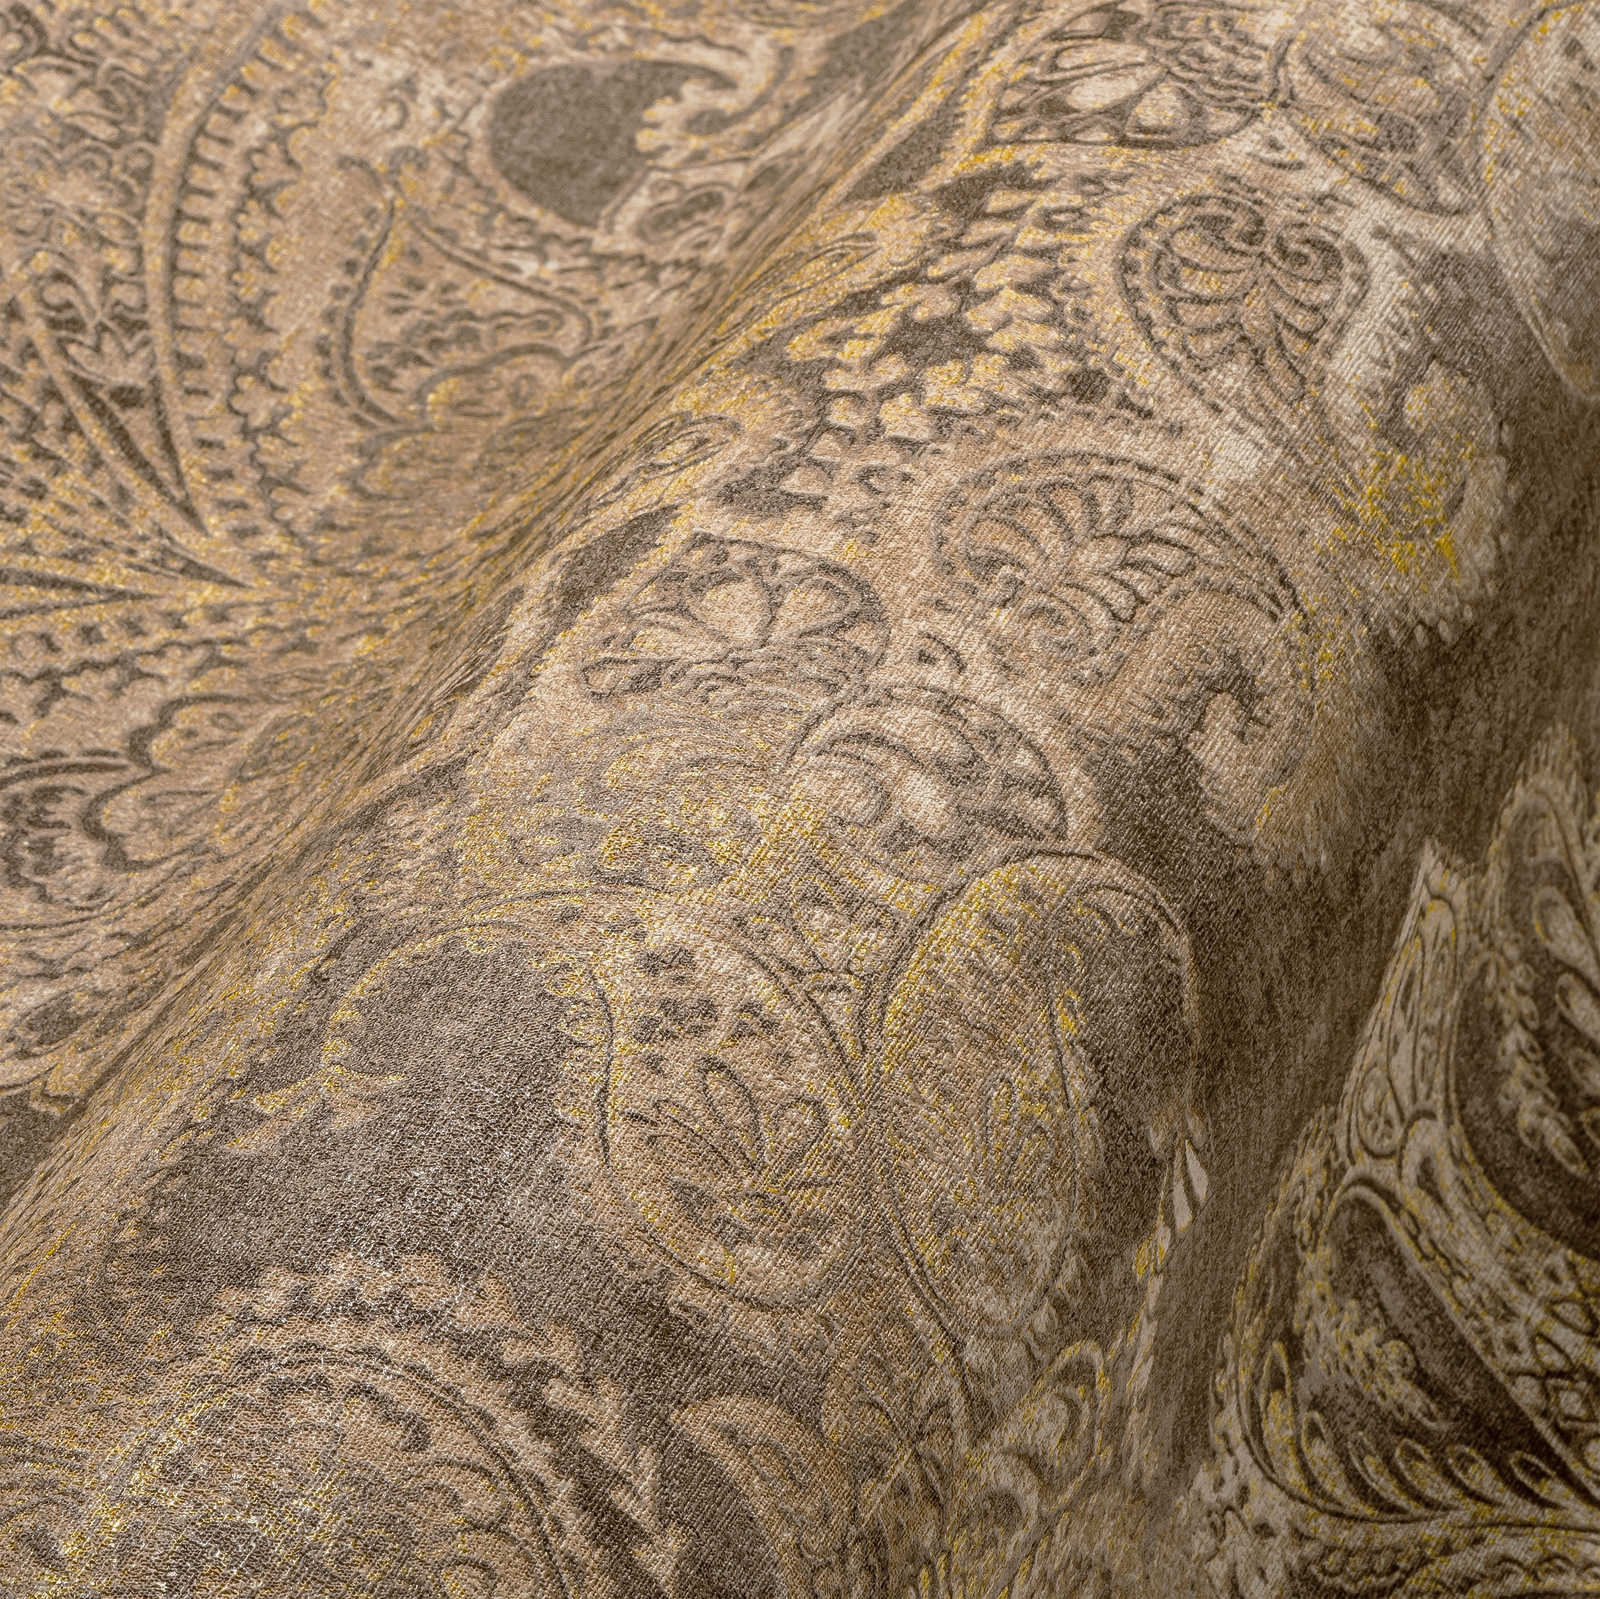             Baroque wallpaper with large ornaments - brown, beige, yellow
        